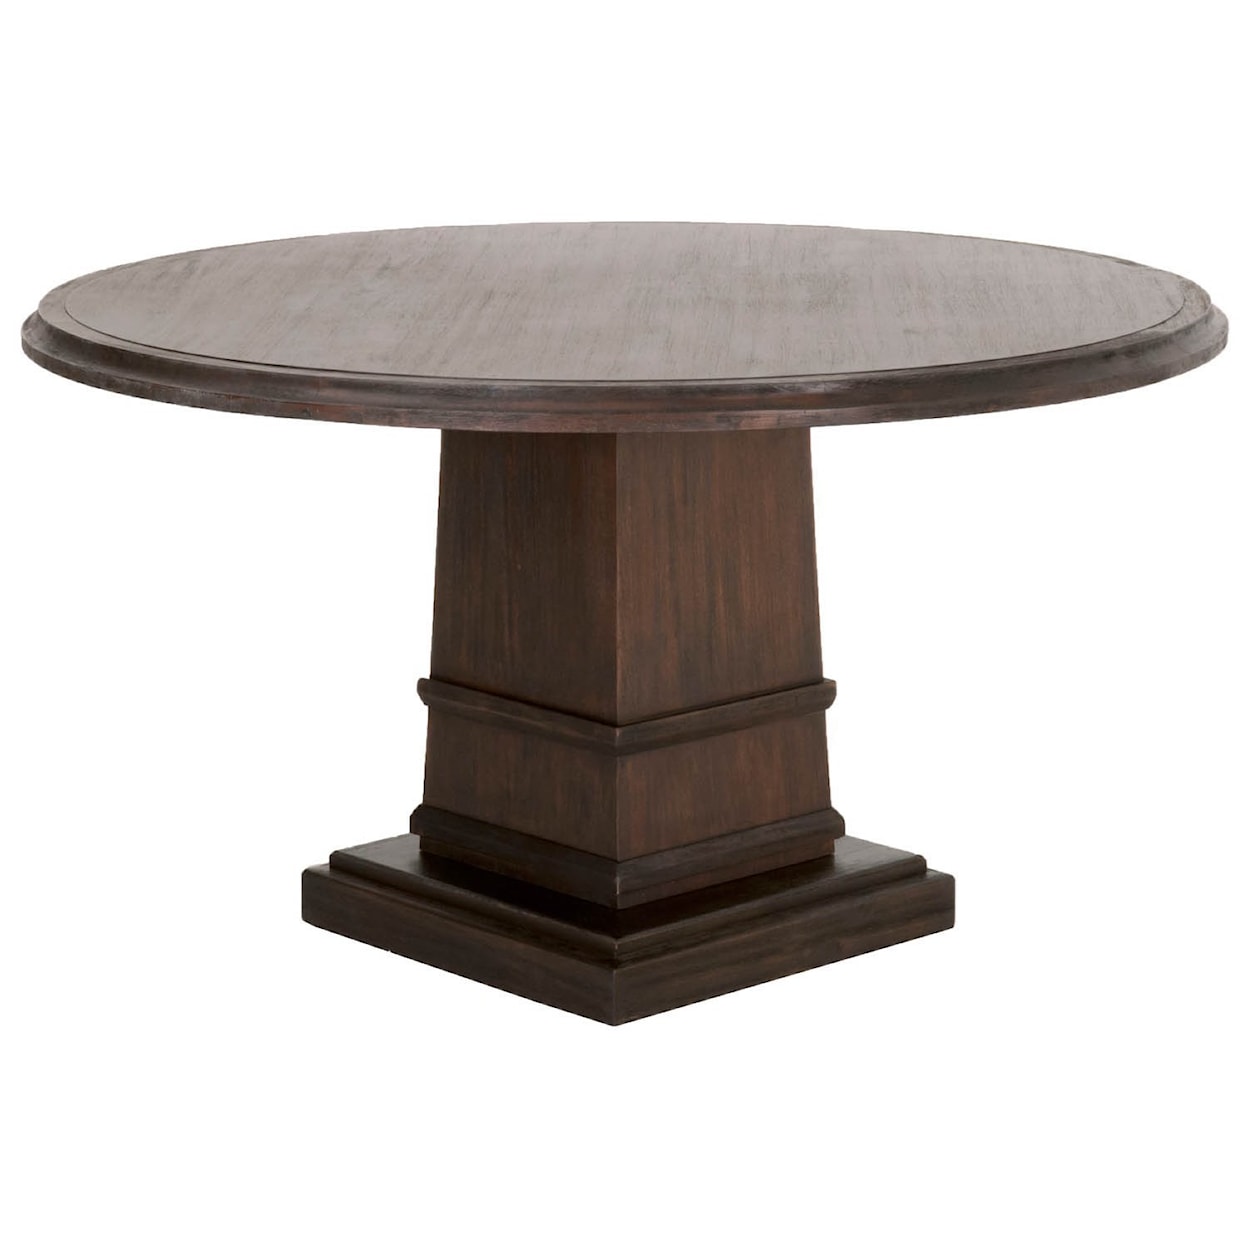 Essentials for Living Traditions Hudson 54" Round Dining Table